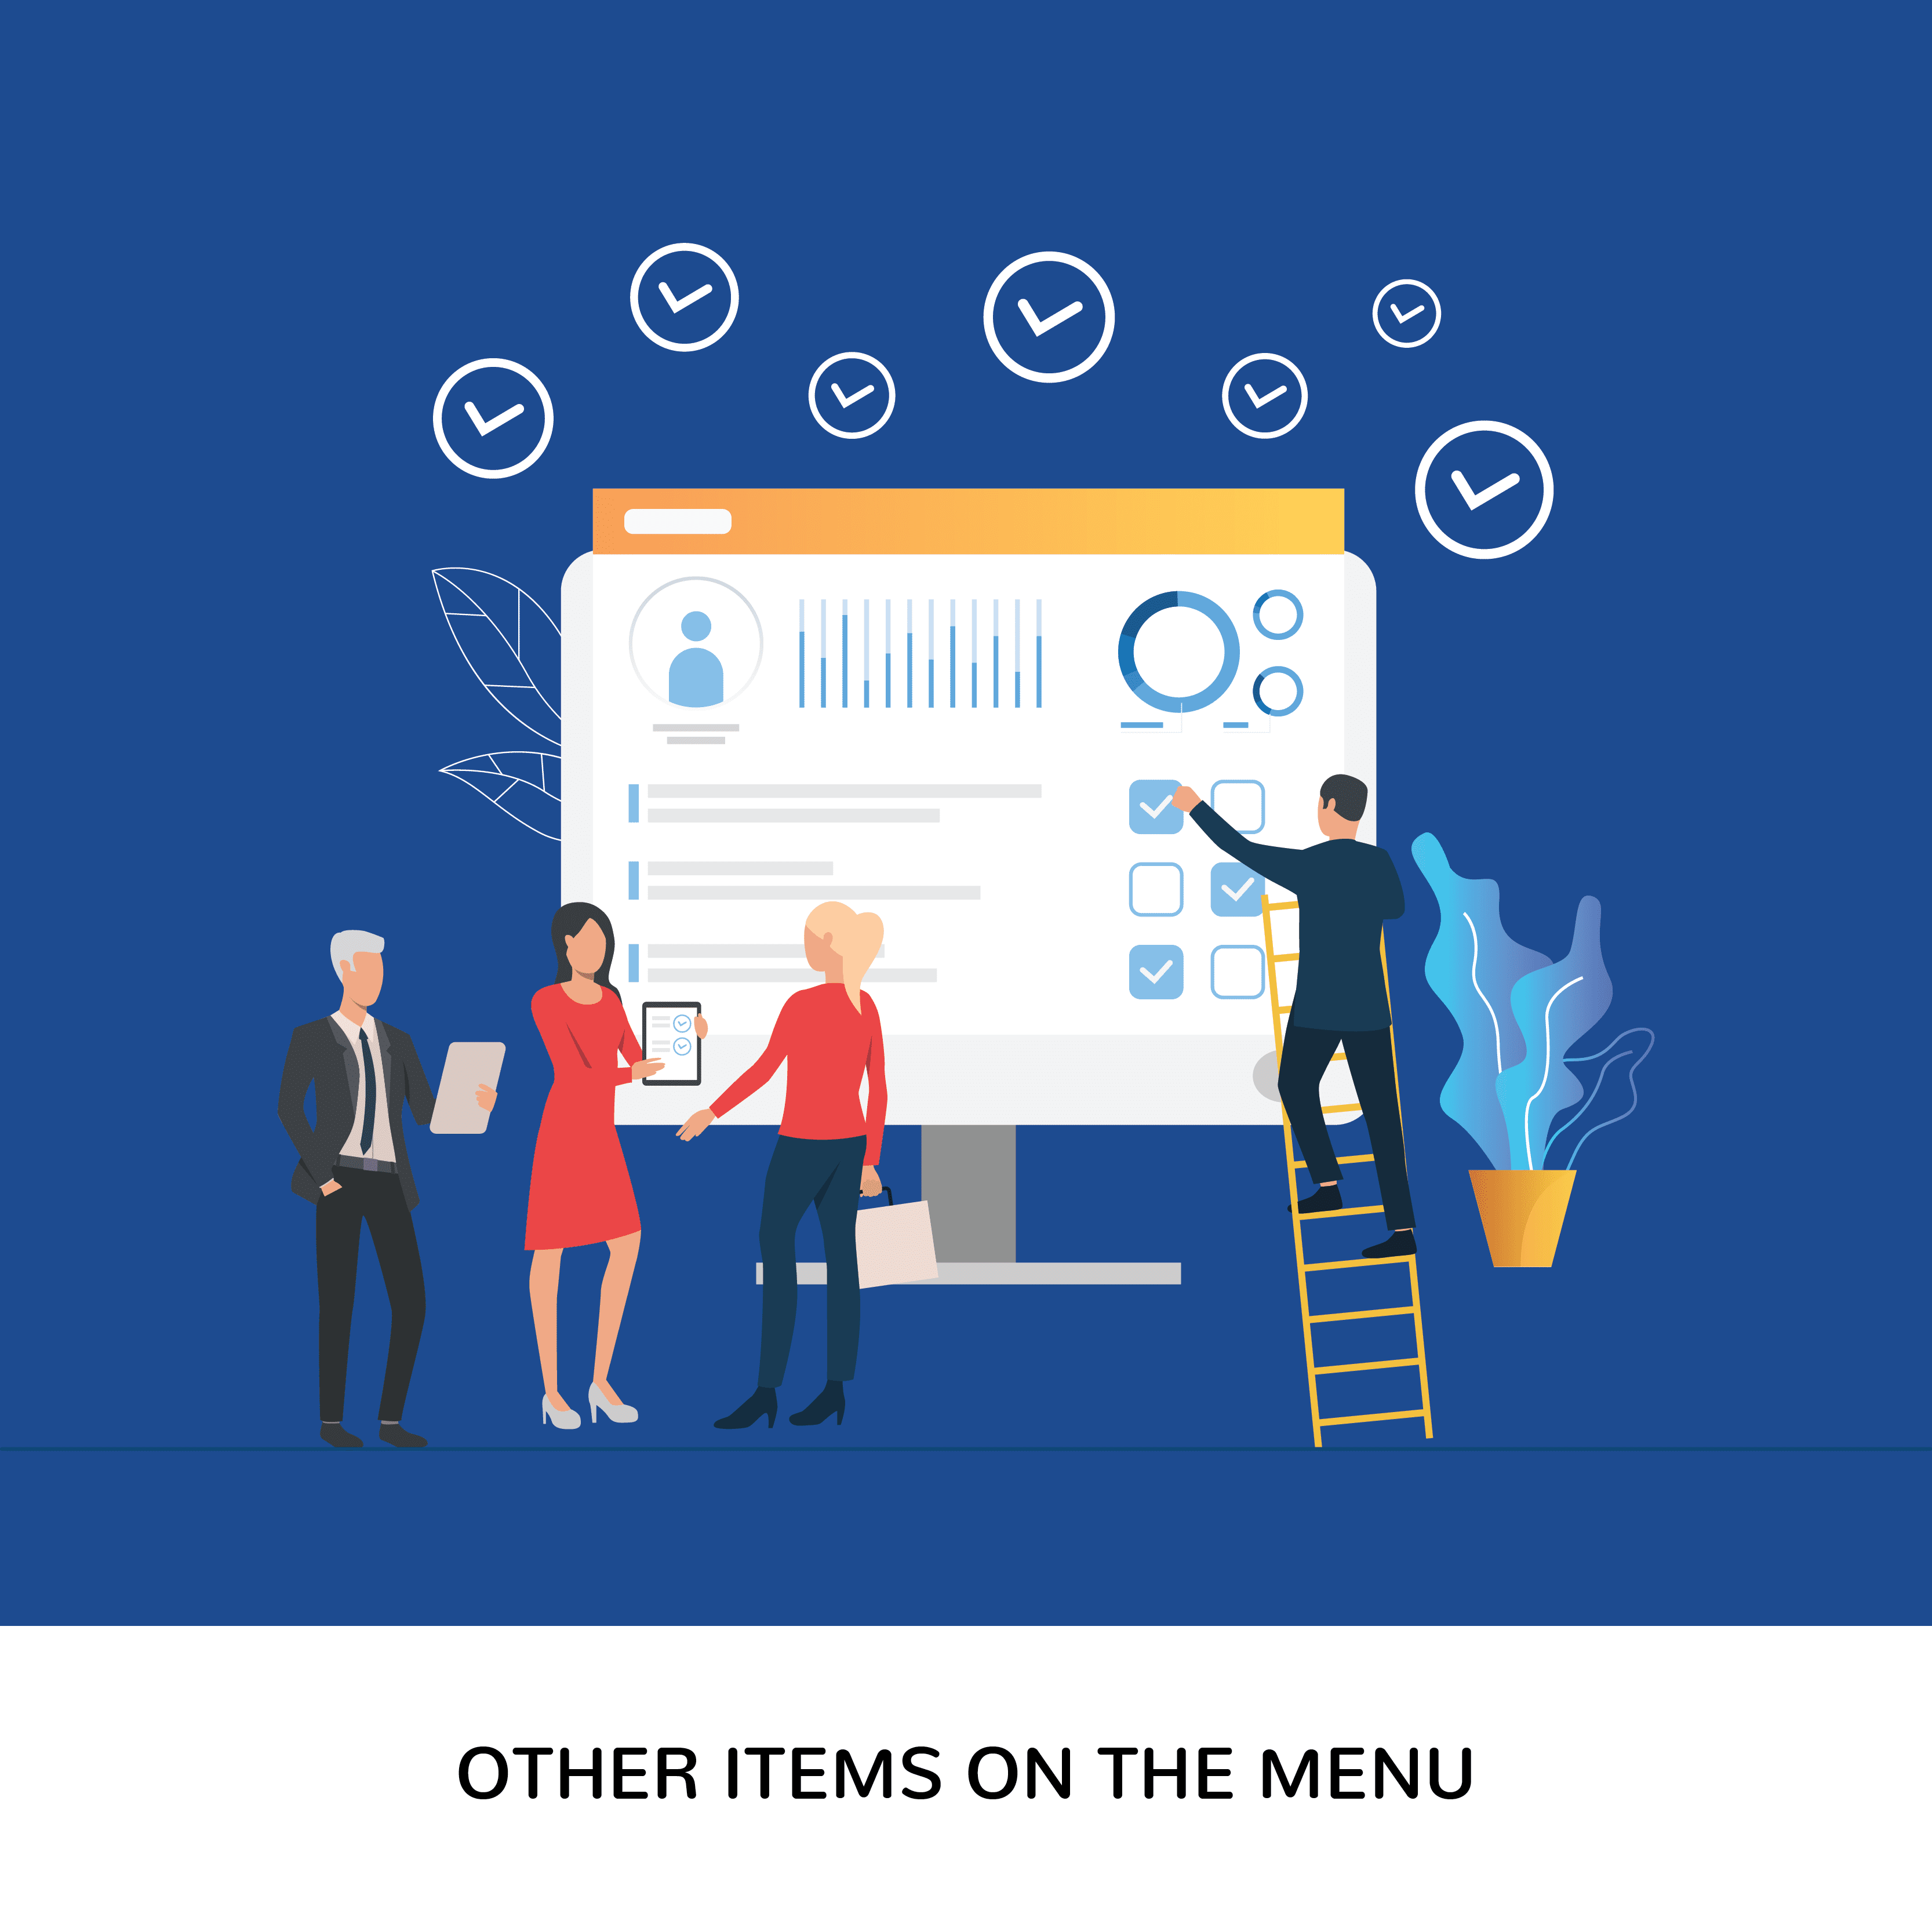 When going deep in the business insights you will get a number of items on the menu